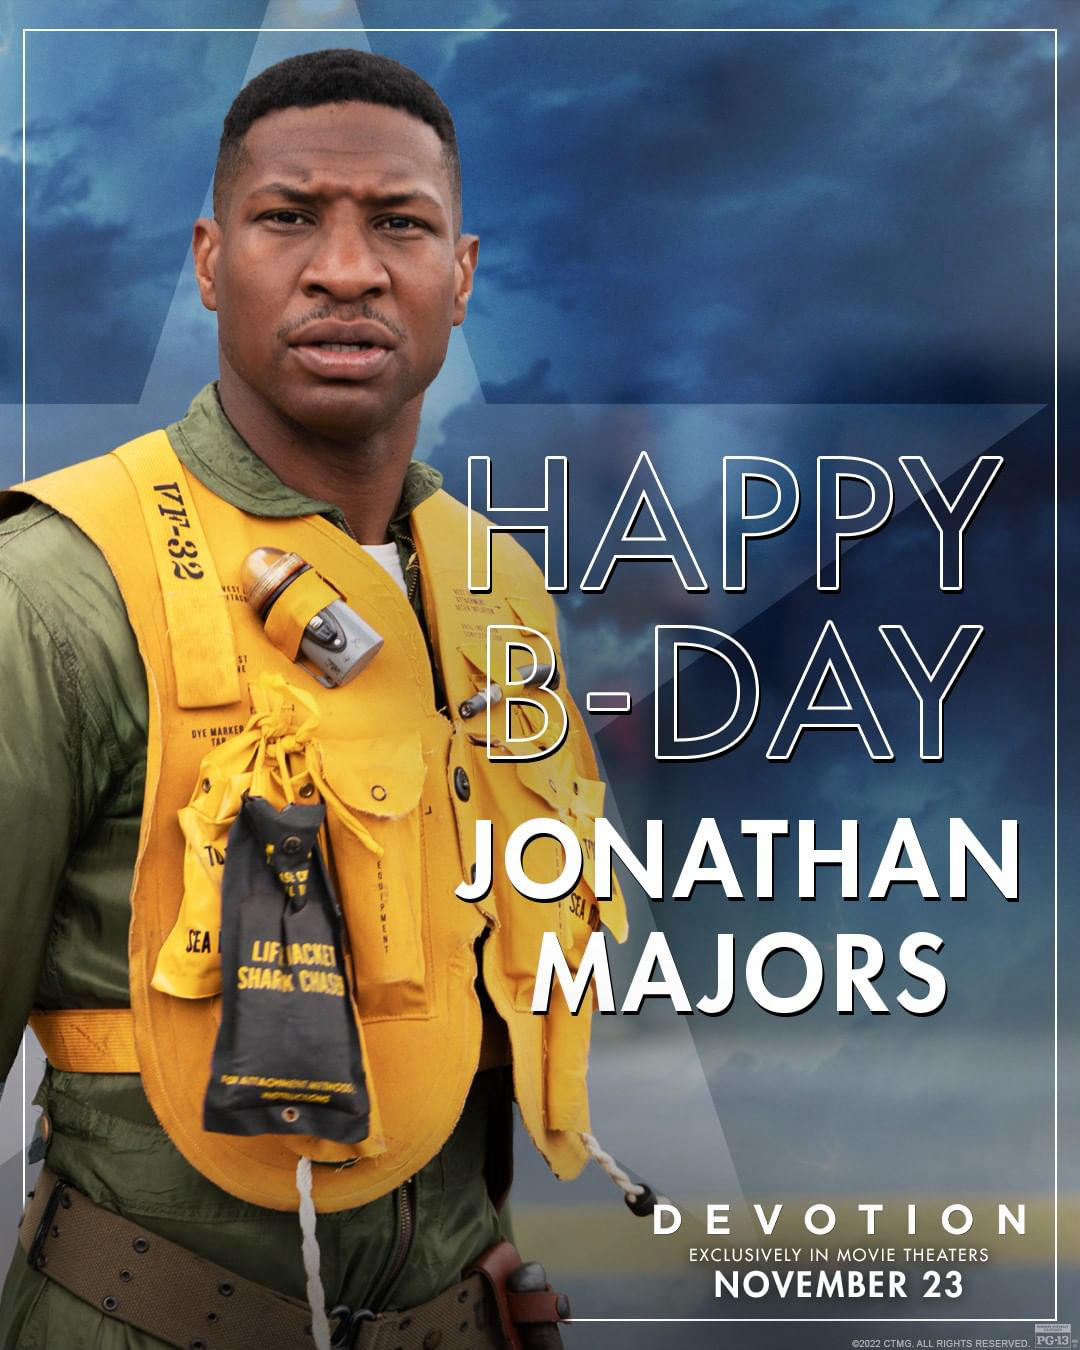 Sony Pictures - Happiest Birthday to our leading man, Jonathan Majors